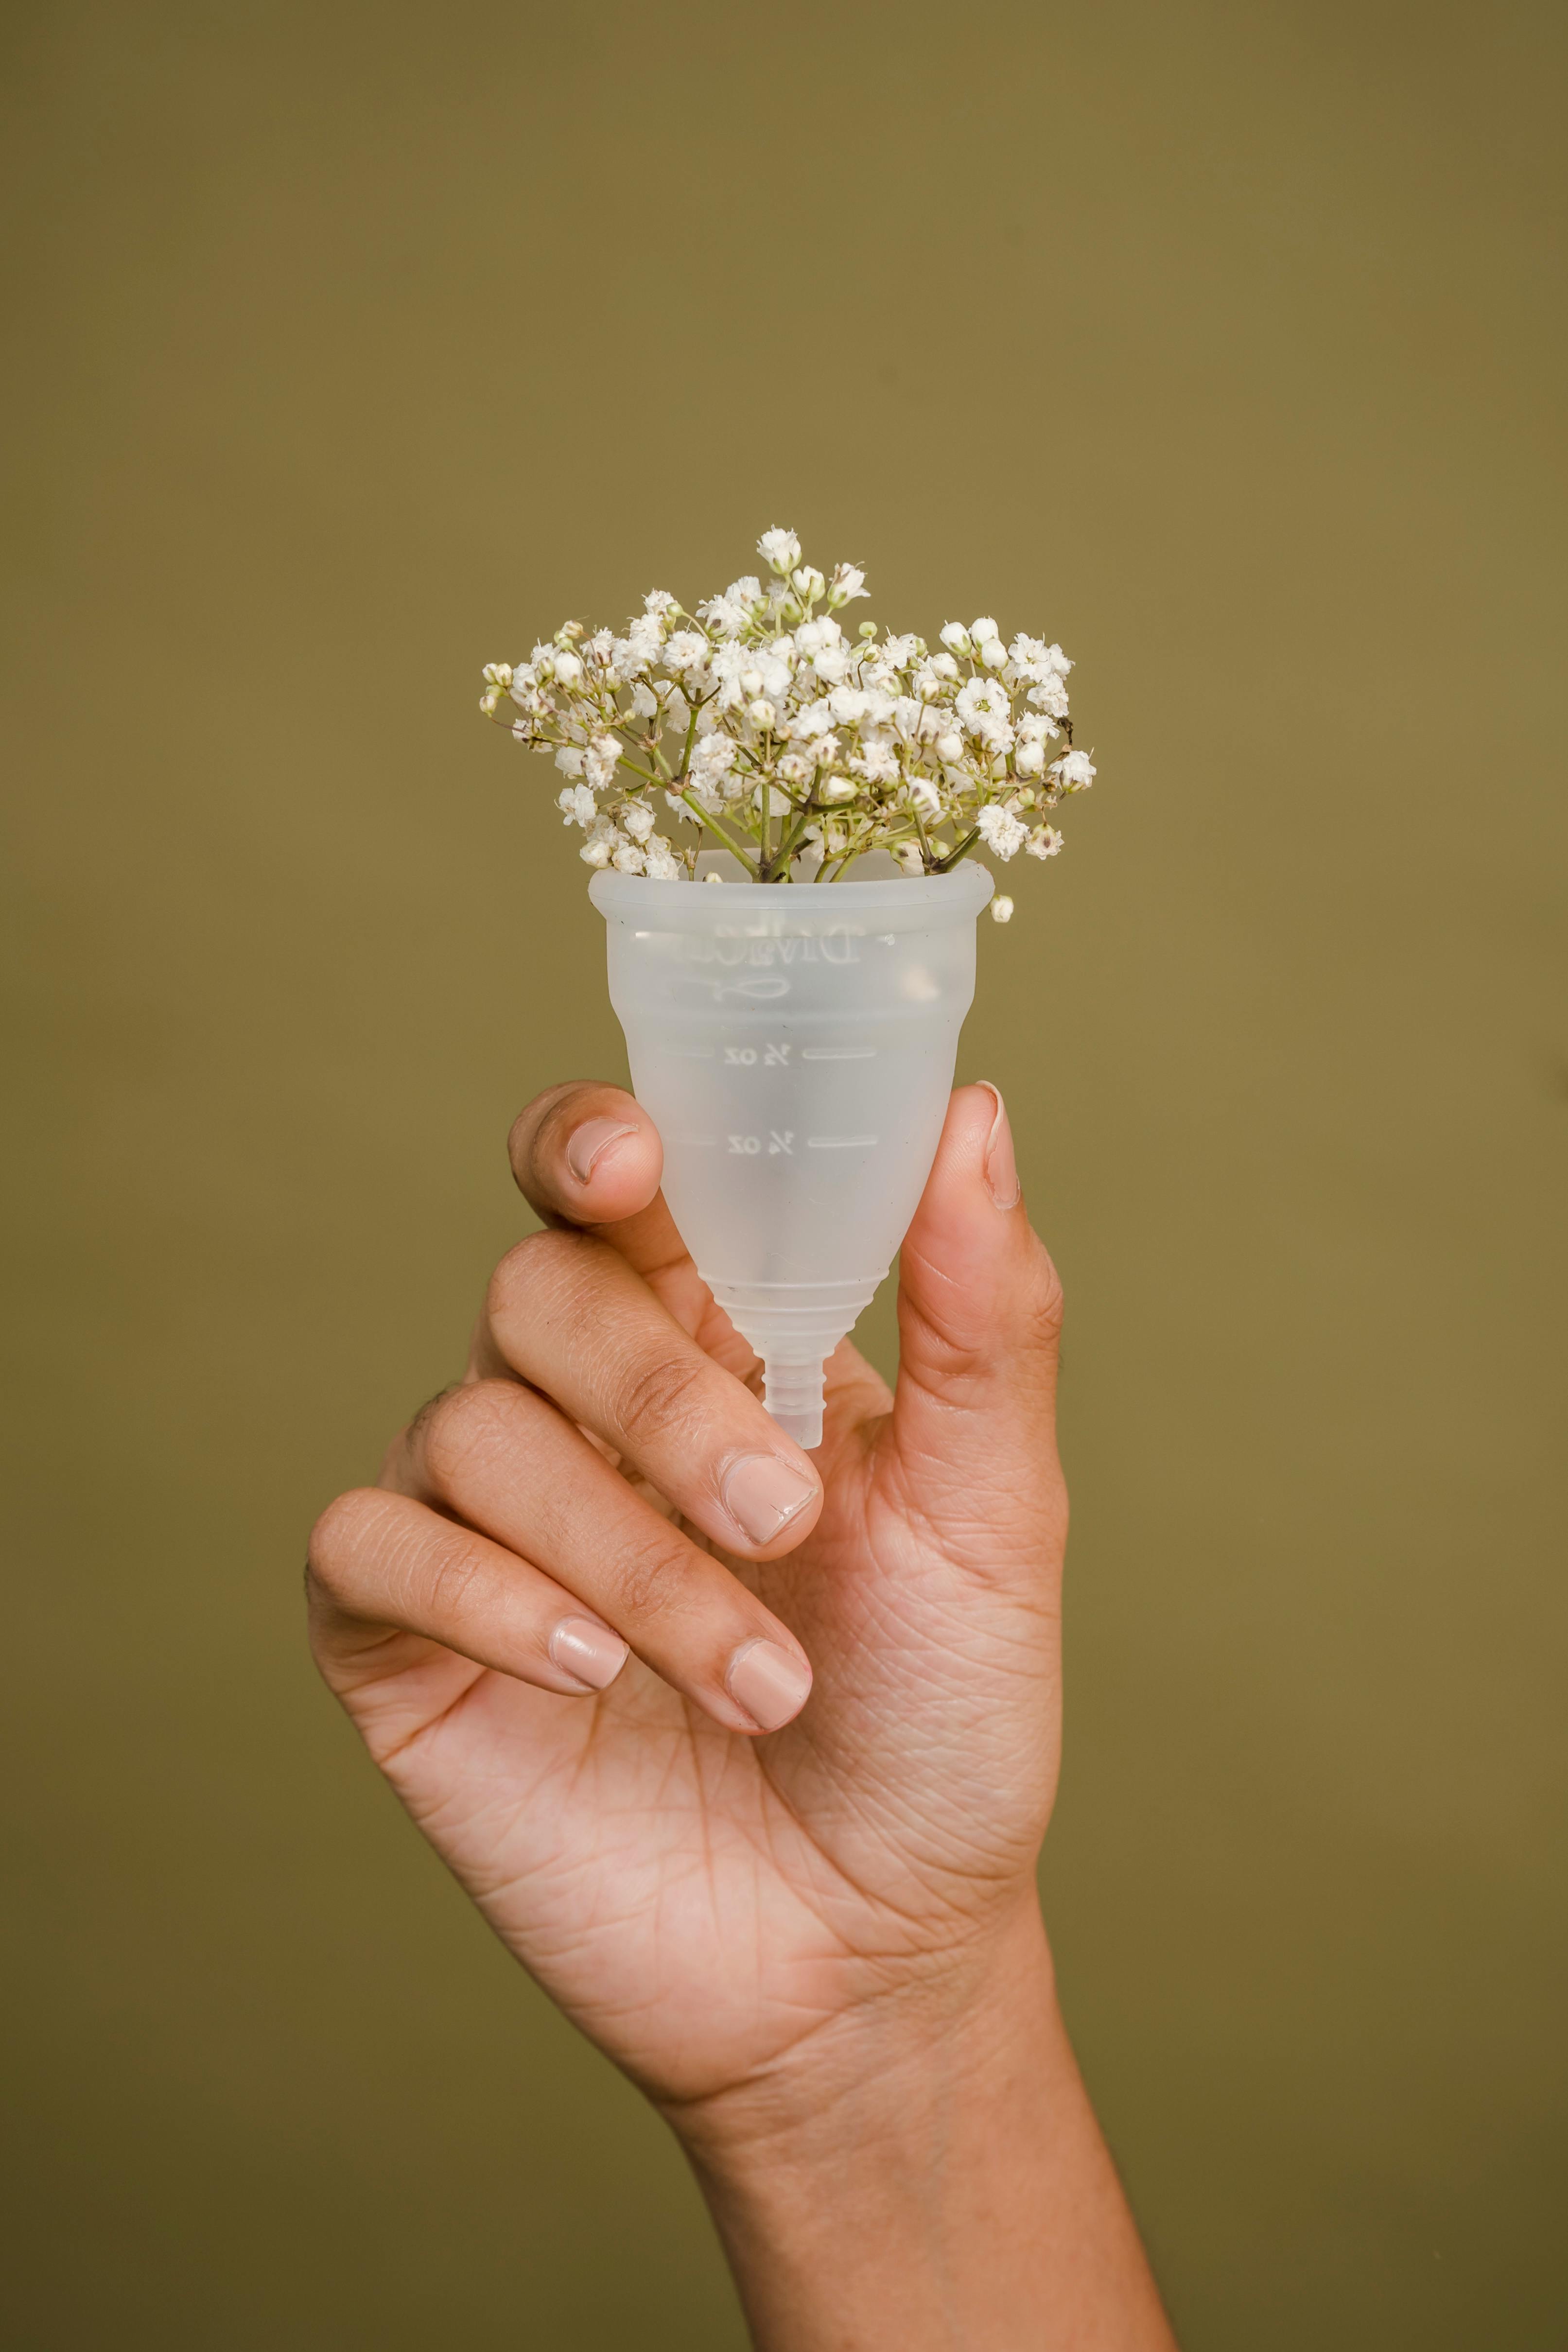 faceless woman showing menstrual cup with tender white flowers